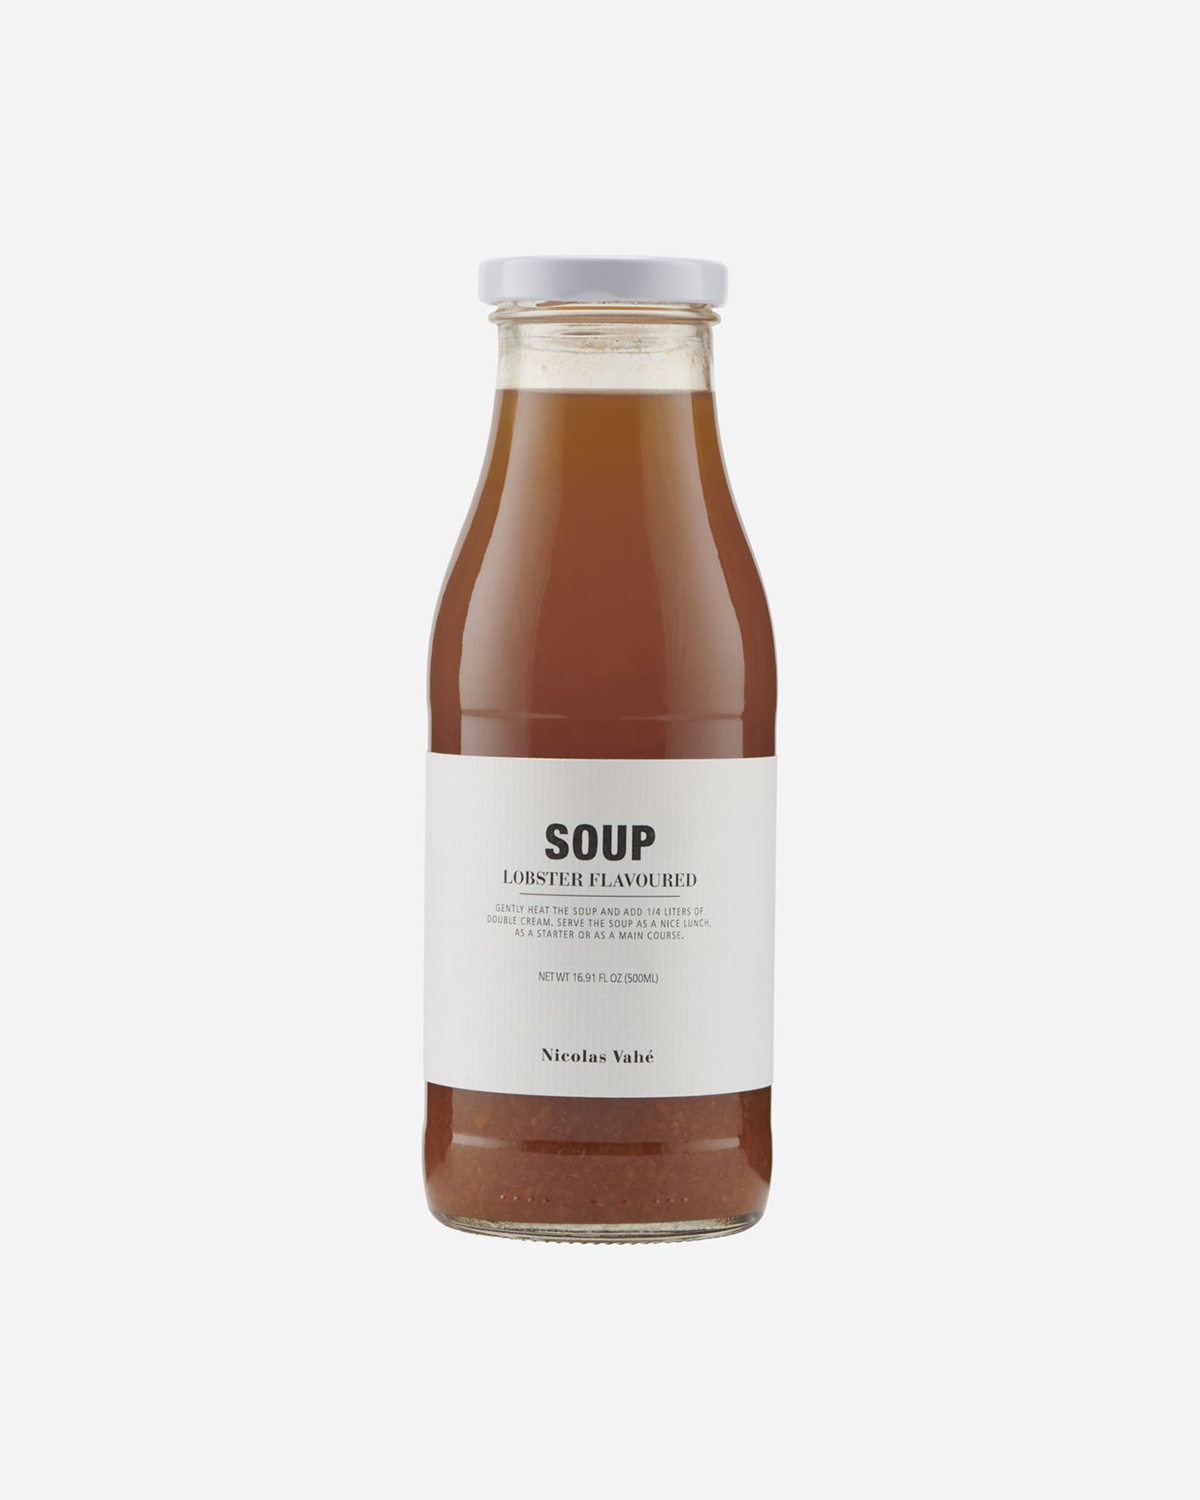 Lobster flavored soup, 500 ml.